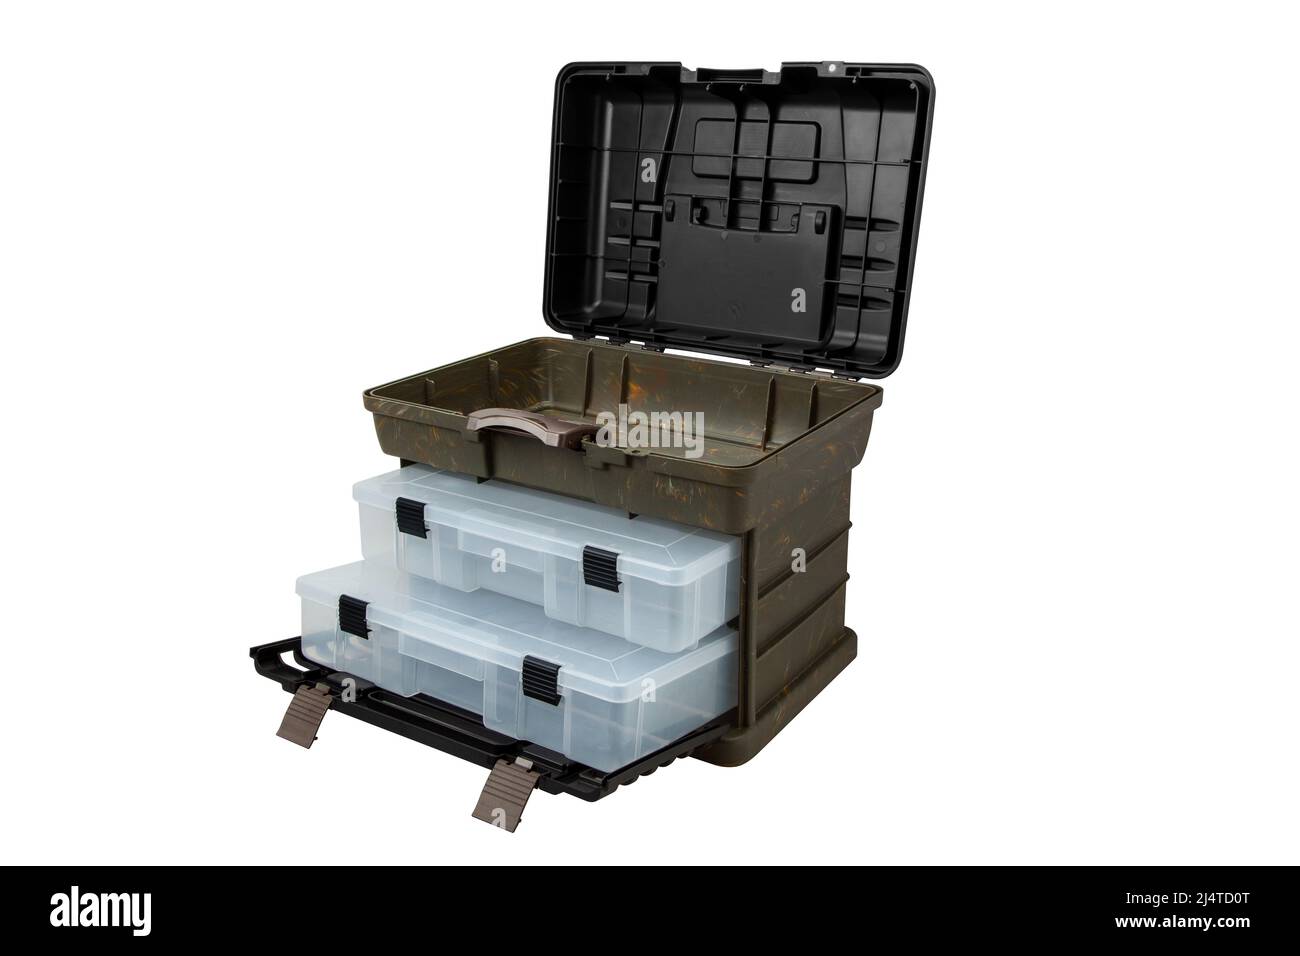 Portable plastic container with opening lid and additional sliding compartments. Fishing or hunting box. Isolate on a white background. Stock Photo